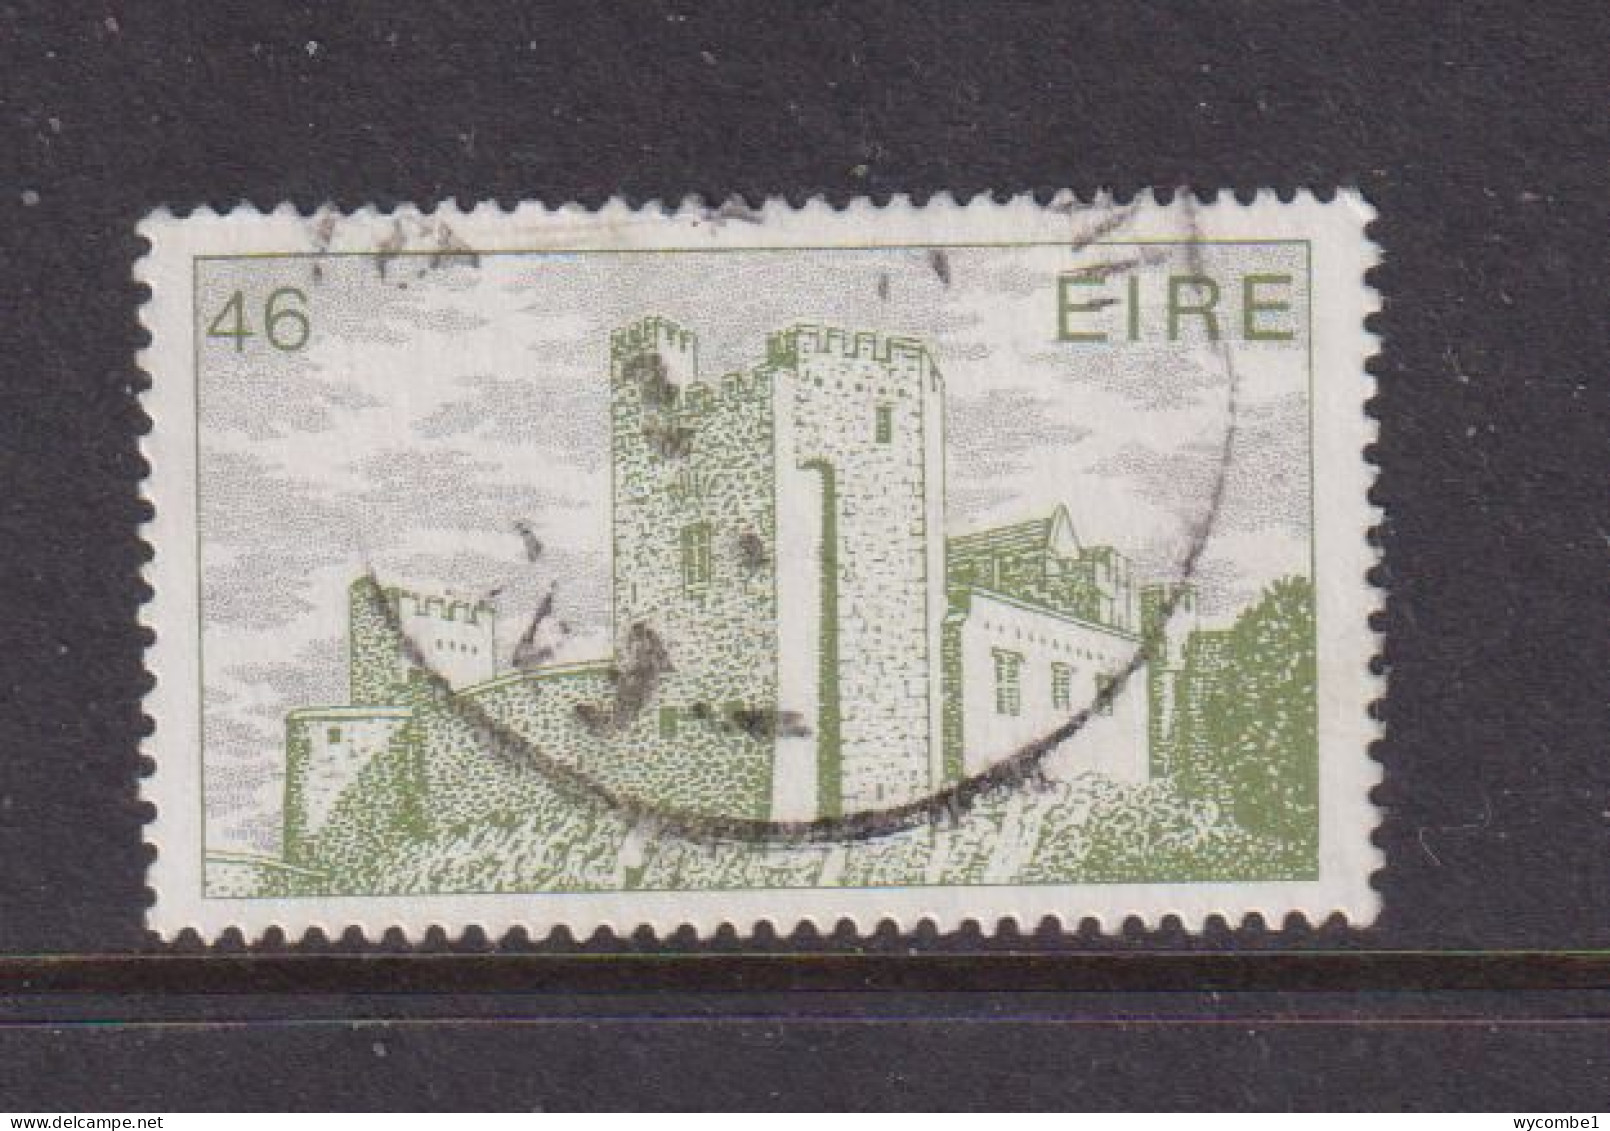 IRELAND - 1963  Architecture Definitive  46p Used As Scan - Used Stamps